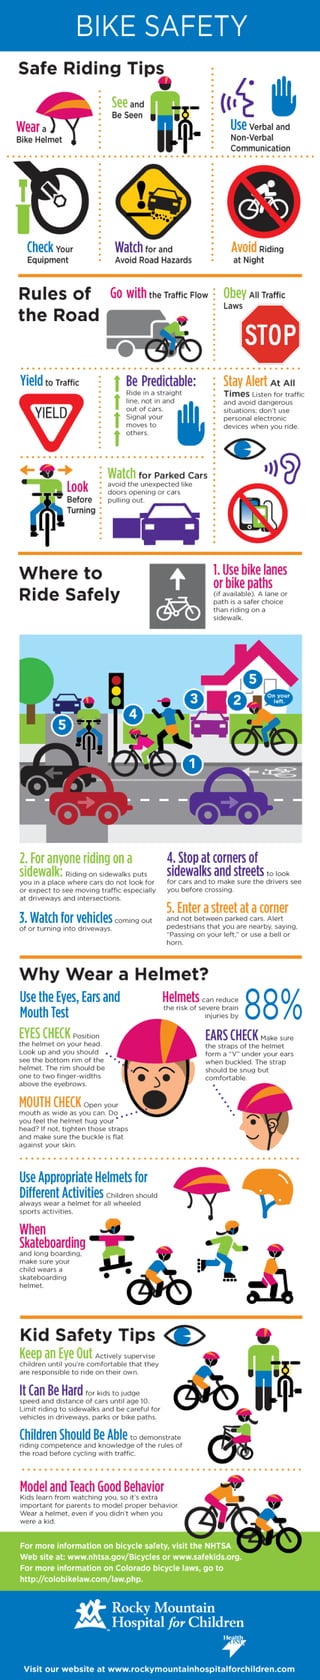 Rocky Mountain Hospital for Children: Bike Safety Infographic